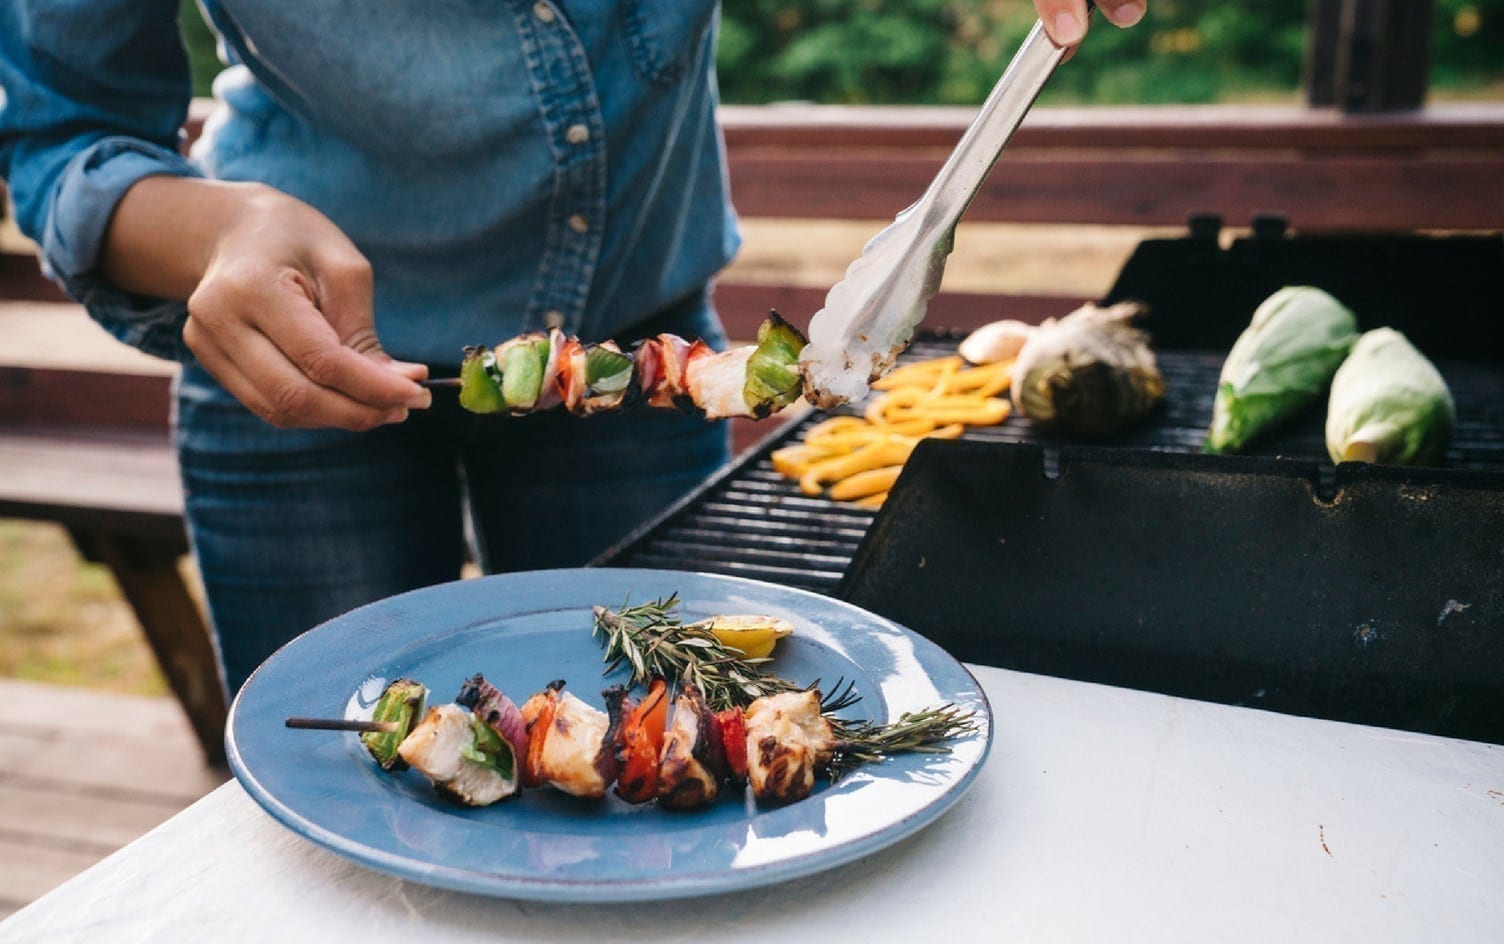 6 Steps to Stay Food-Safe at a Cookout | Nutrition | MyFitnessPal